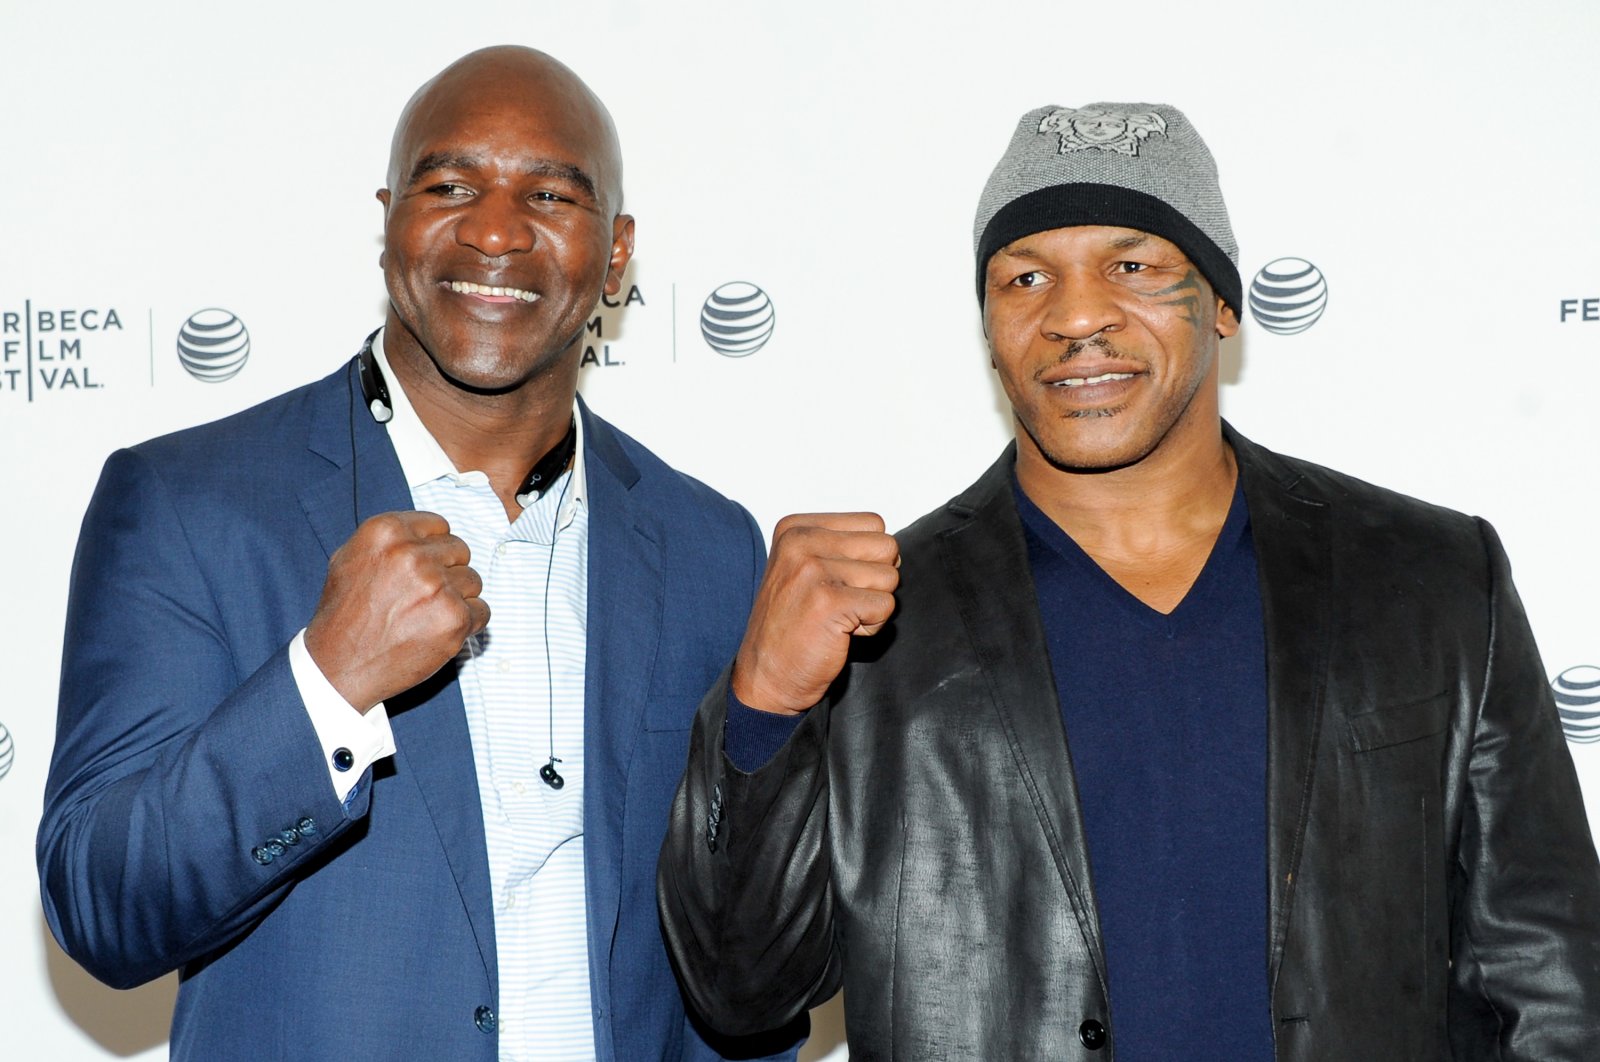 Evander Holyfield (L) and Mike Tyson pose together at an event in New York, U.S., April 19, 2014. (AP Photo)